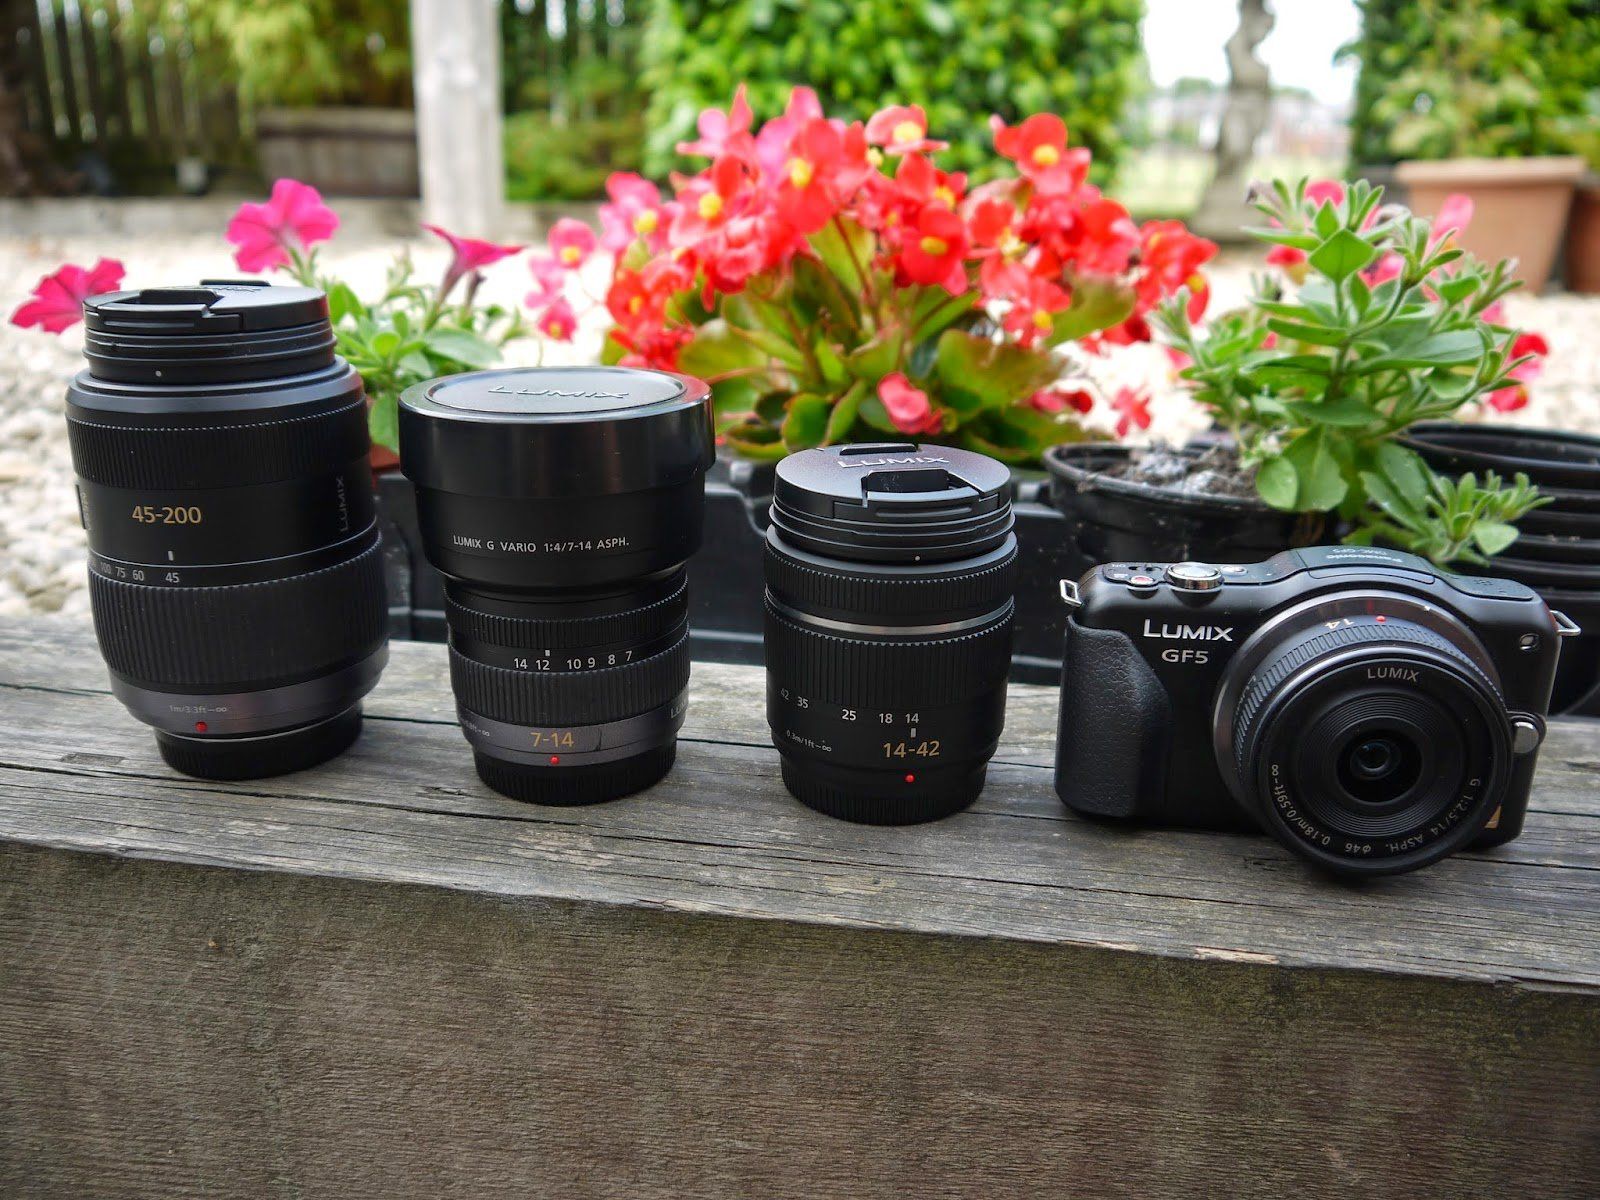 Line up of Micro 4/3rd's lenses  45 - 200 zoom, 7 - 14 wide, 14 - 42 standard and the 14mm fixed focal lenses.